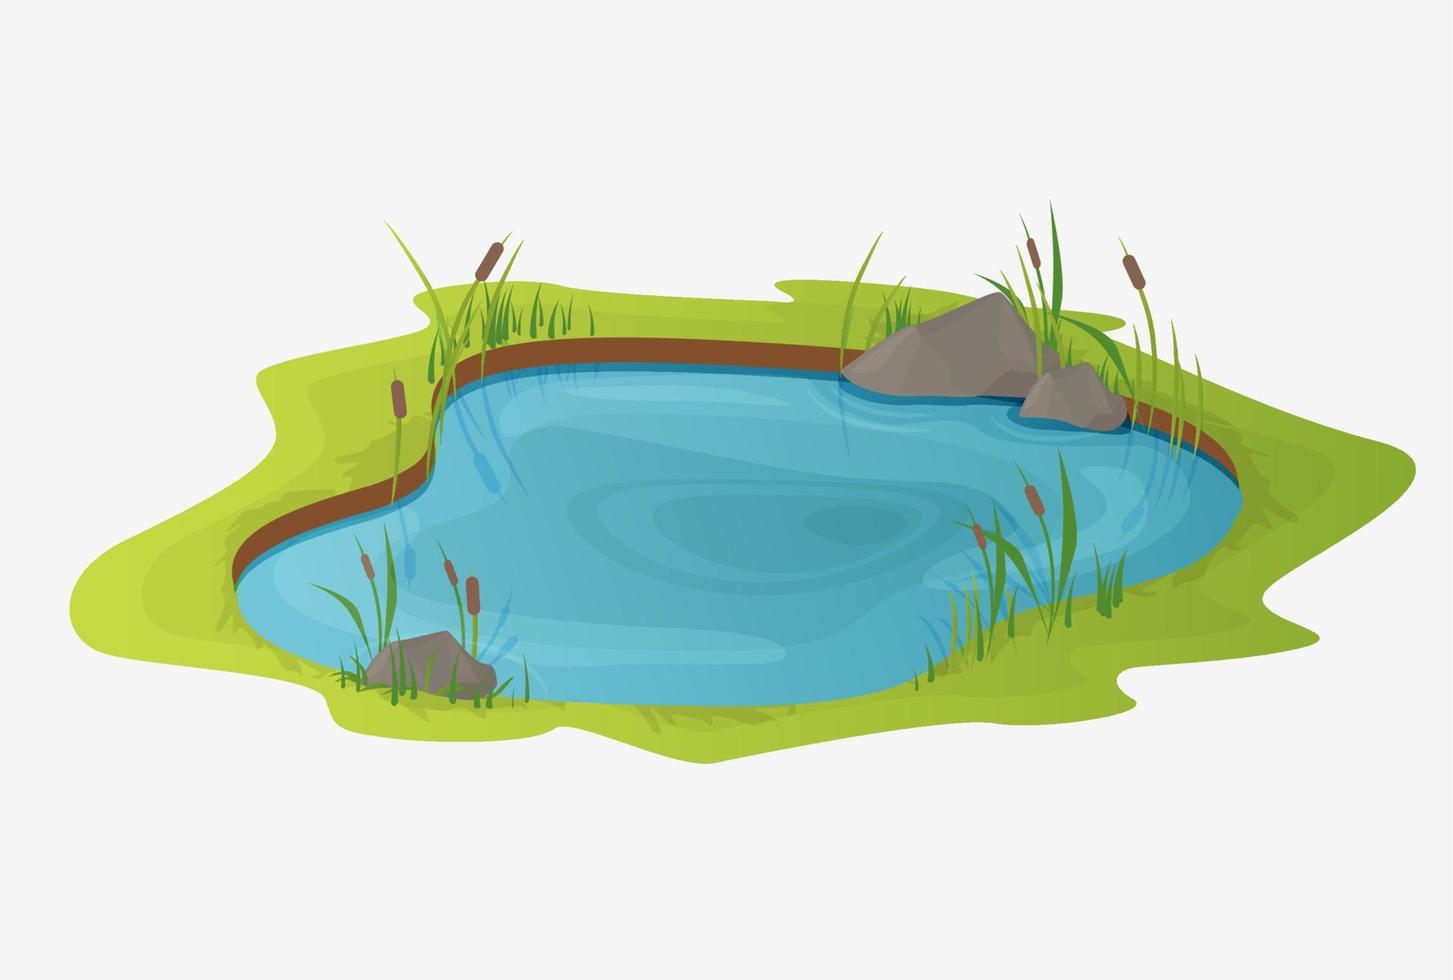 Picturesque water pond with reeds. The concept of an open small swamp lake in a natural landscape style. Natural natural design in a beautiful color, rural, country style illustration. vector